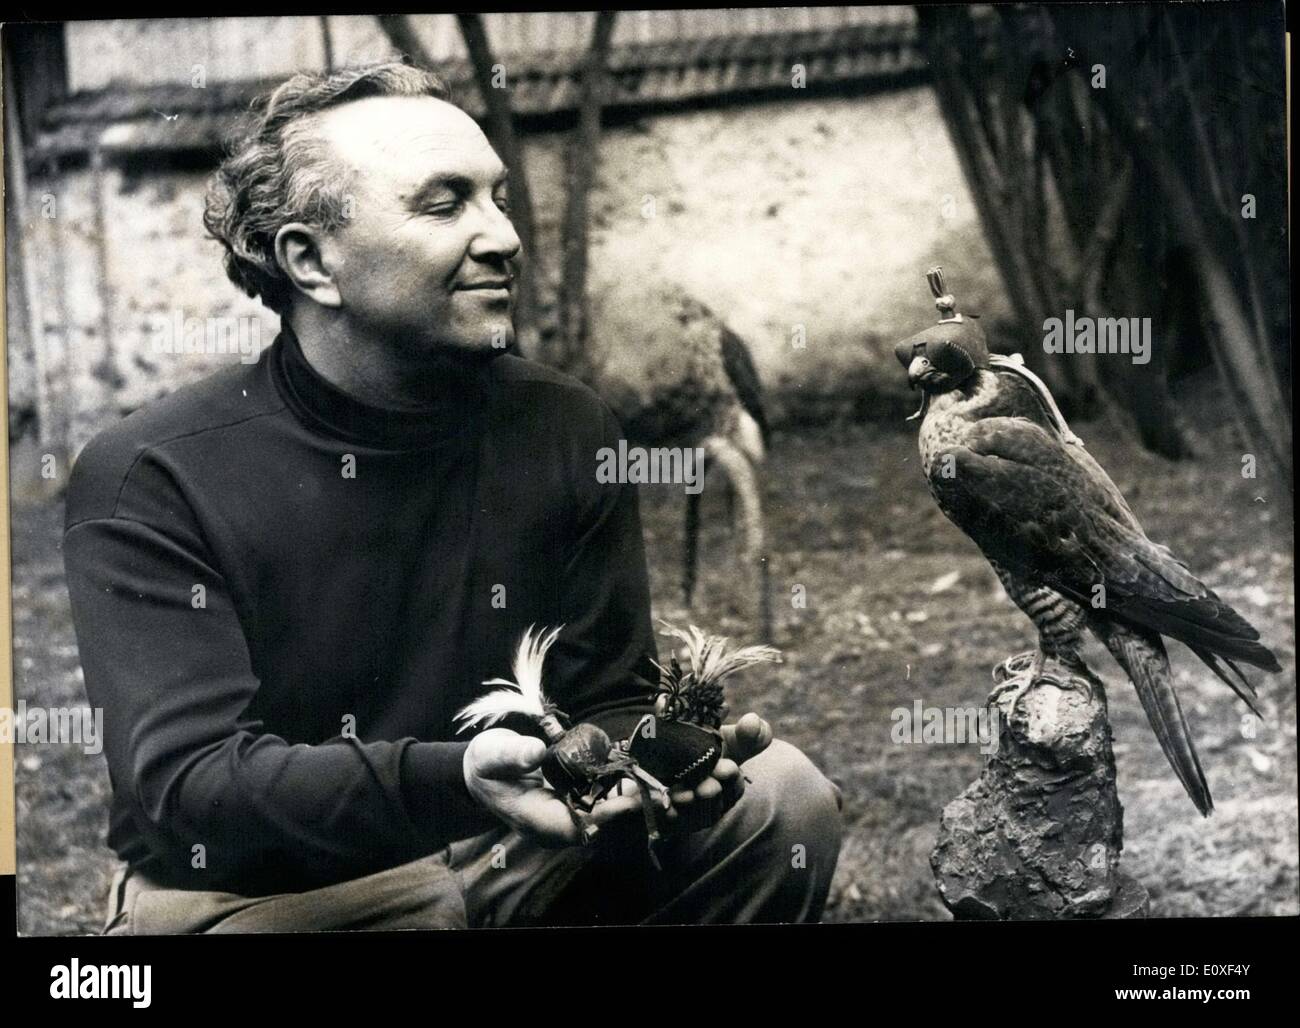 Jul. 26, 1966 - Sepp Wensauer(of Wurth) seems to be asking his falcon which helm he would prefer. Since the falcon trainer was little he had an interest in ornithology, particularly in birds of prey, which were plentiful in his region. He would nurse the injured birds he found back to health. In 1936 he joined the German Falcon Order and since then he has maintained his passion in the area. The collector's value for a falcon is between 10,000 and 20,000 DM, and even then a first-class animal is hard to come by. Stock Photo